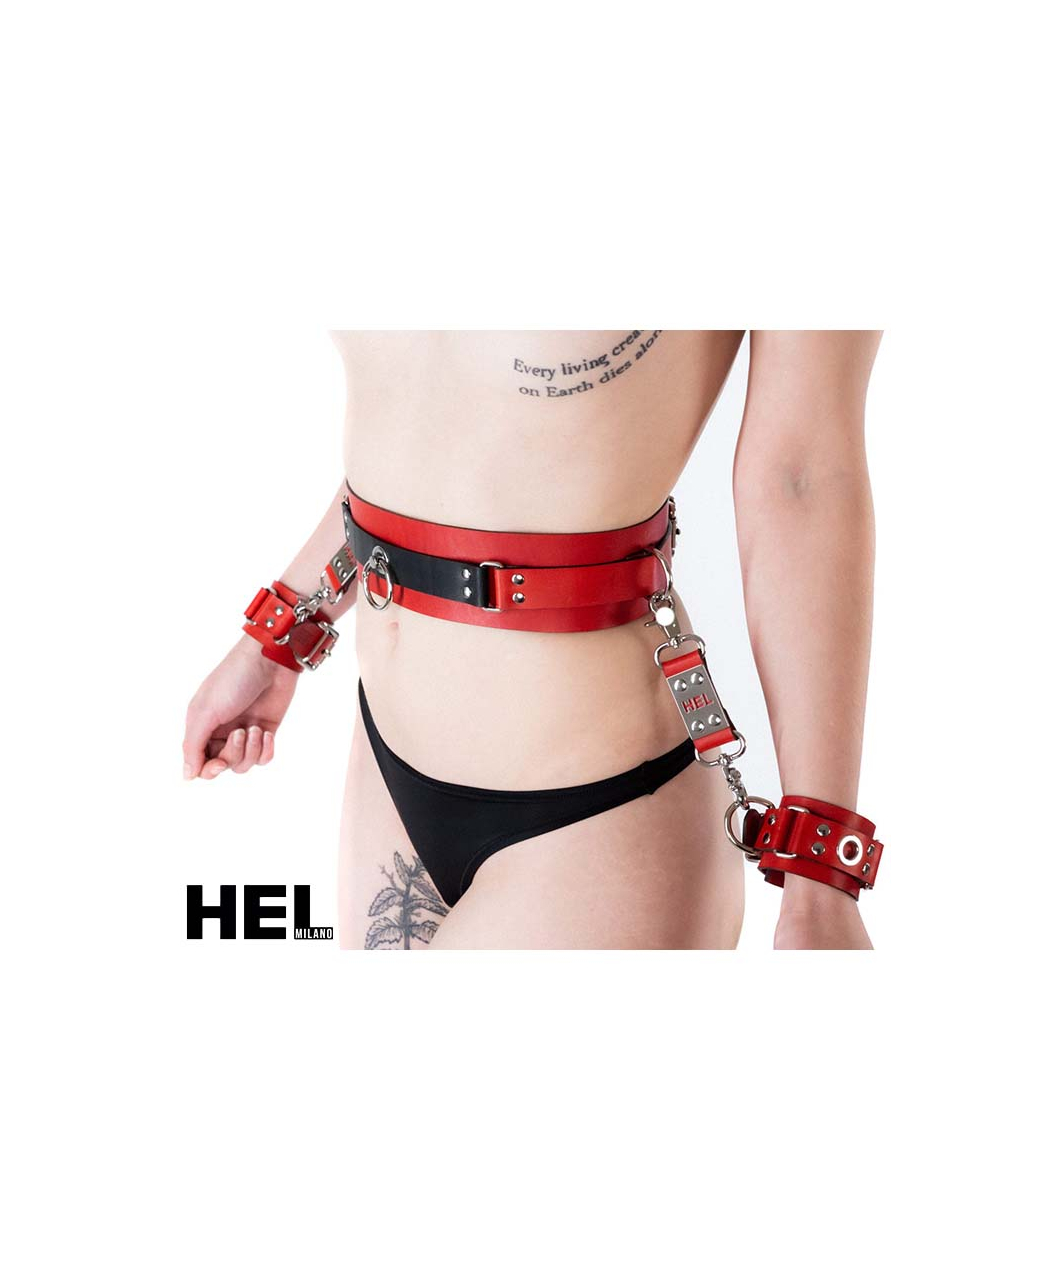 HEL Milano 13 cm long Leather Connector with Snap Hooks